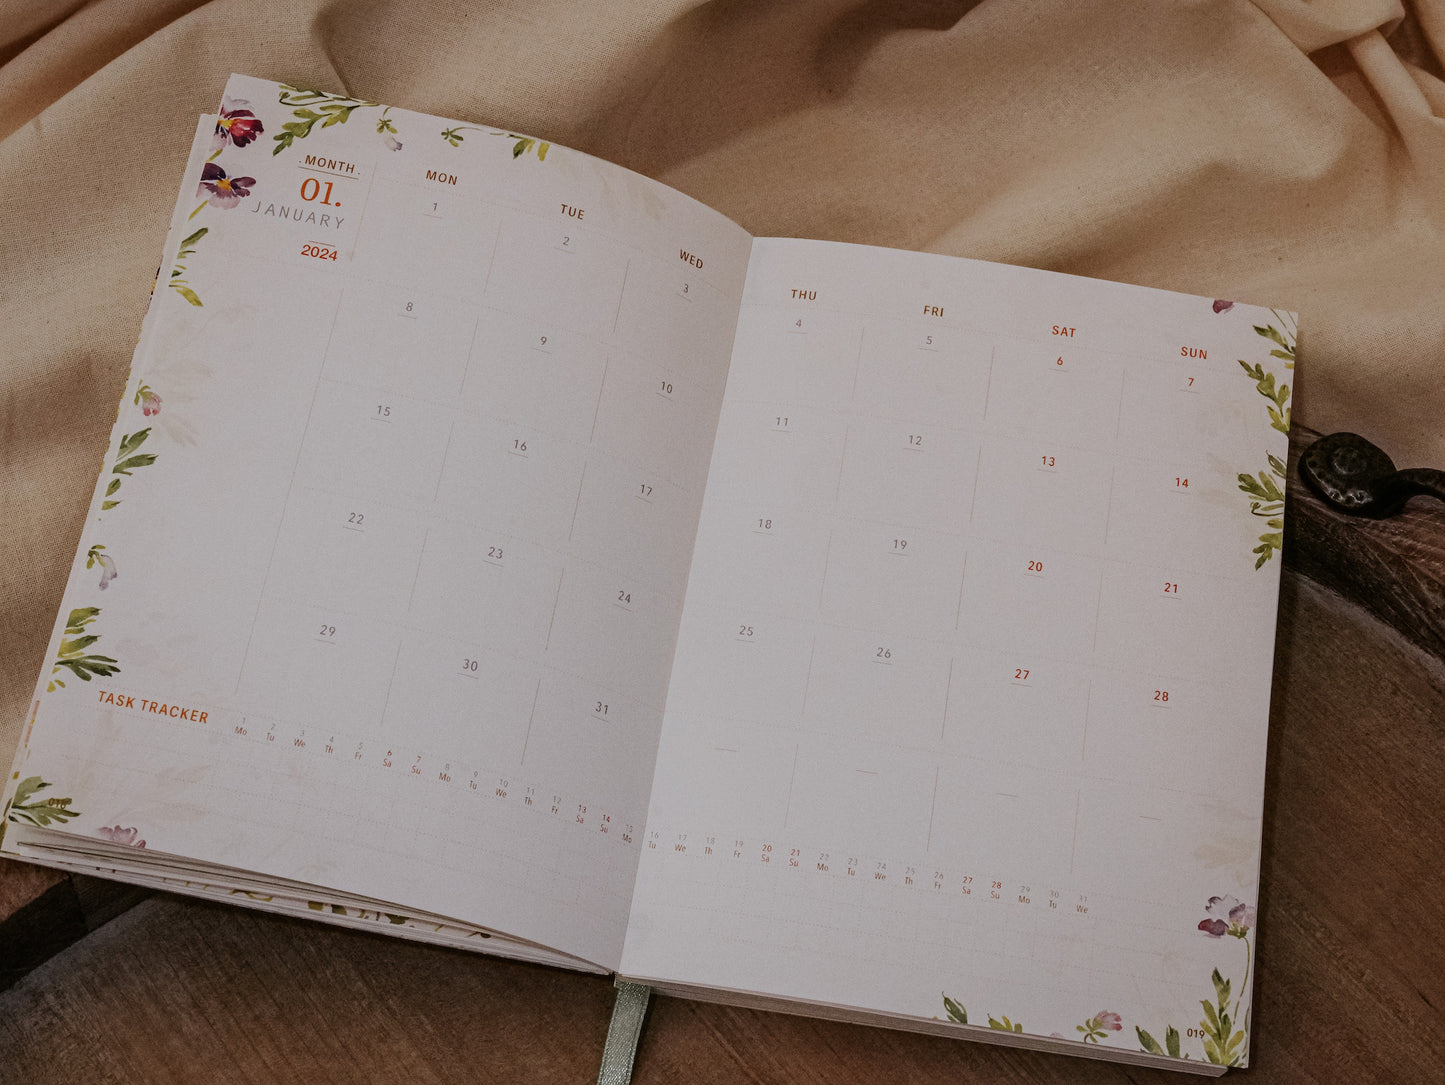 Meow Illustration 2024 Weekly Planner - A Year of Blossoms (Pre-Order Only, Ships in December)